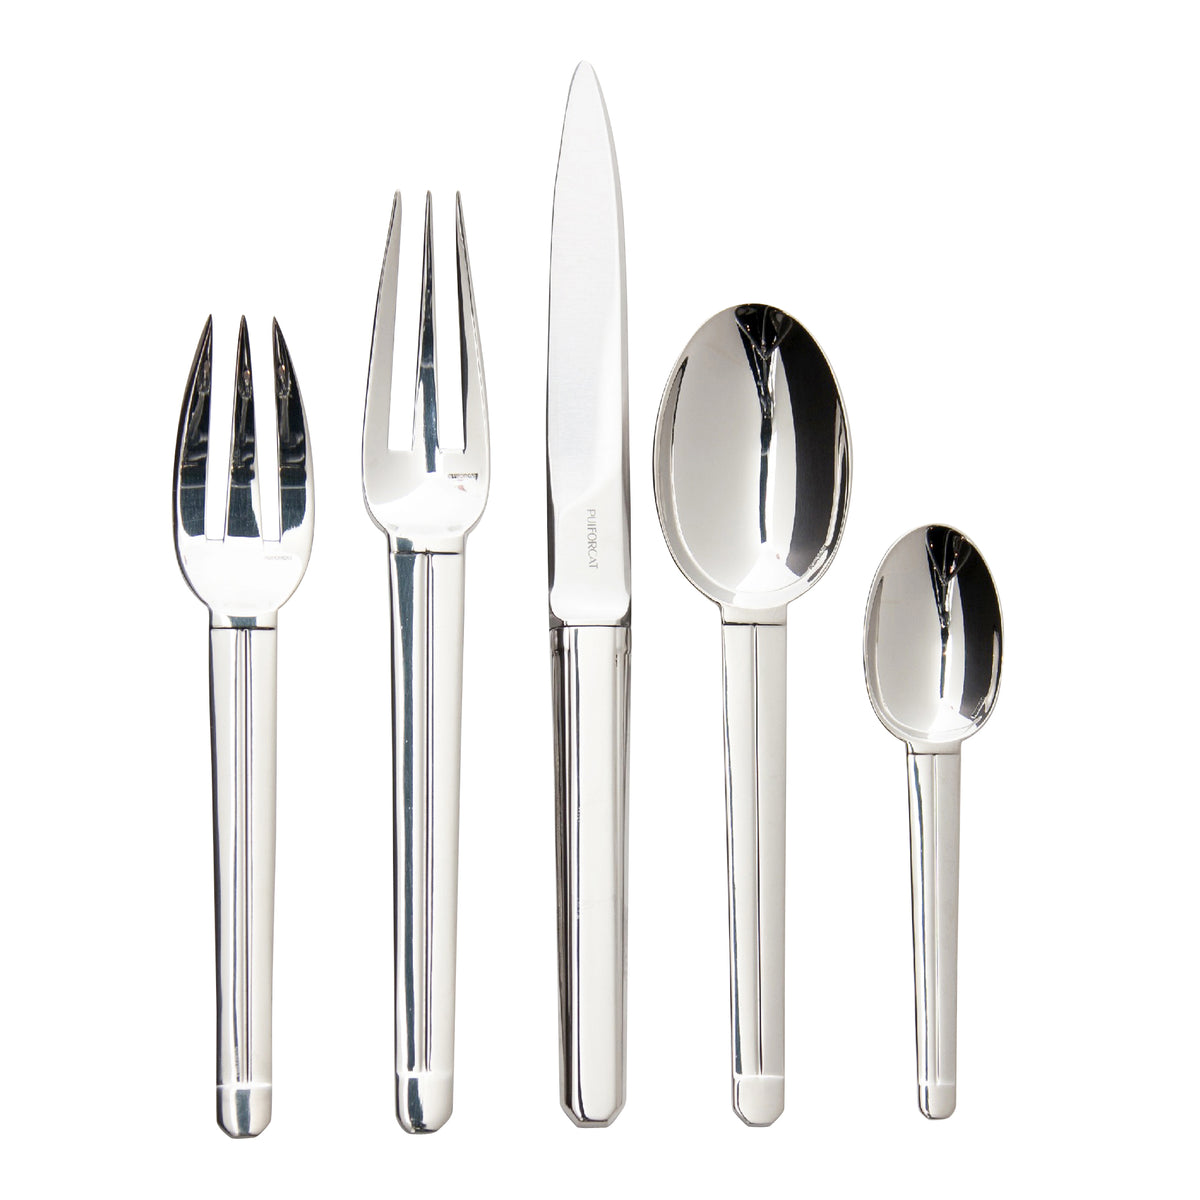 Guethary Stainless Steel Flatware, 5 Piece Set